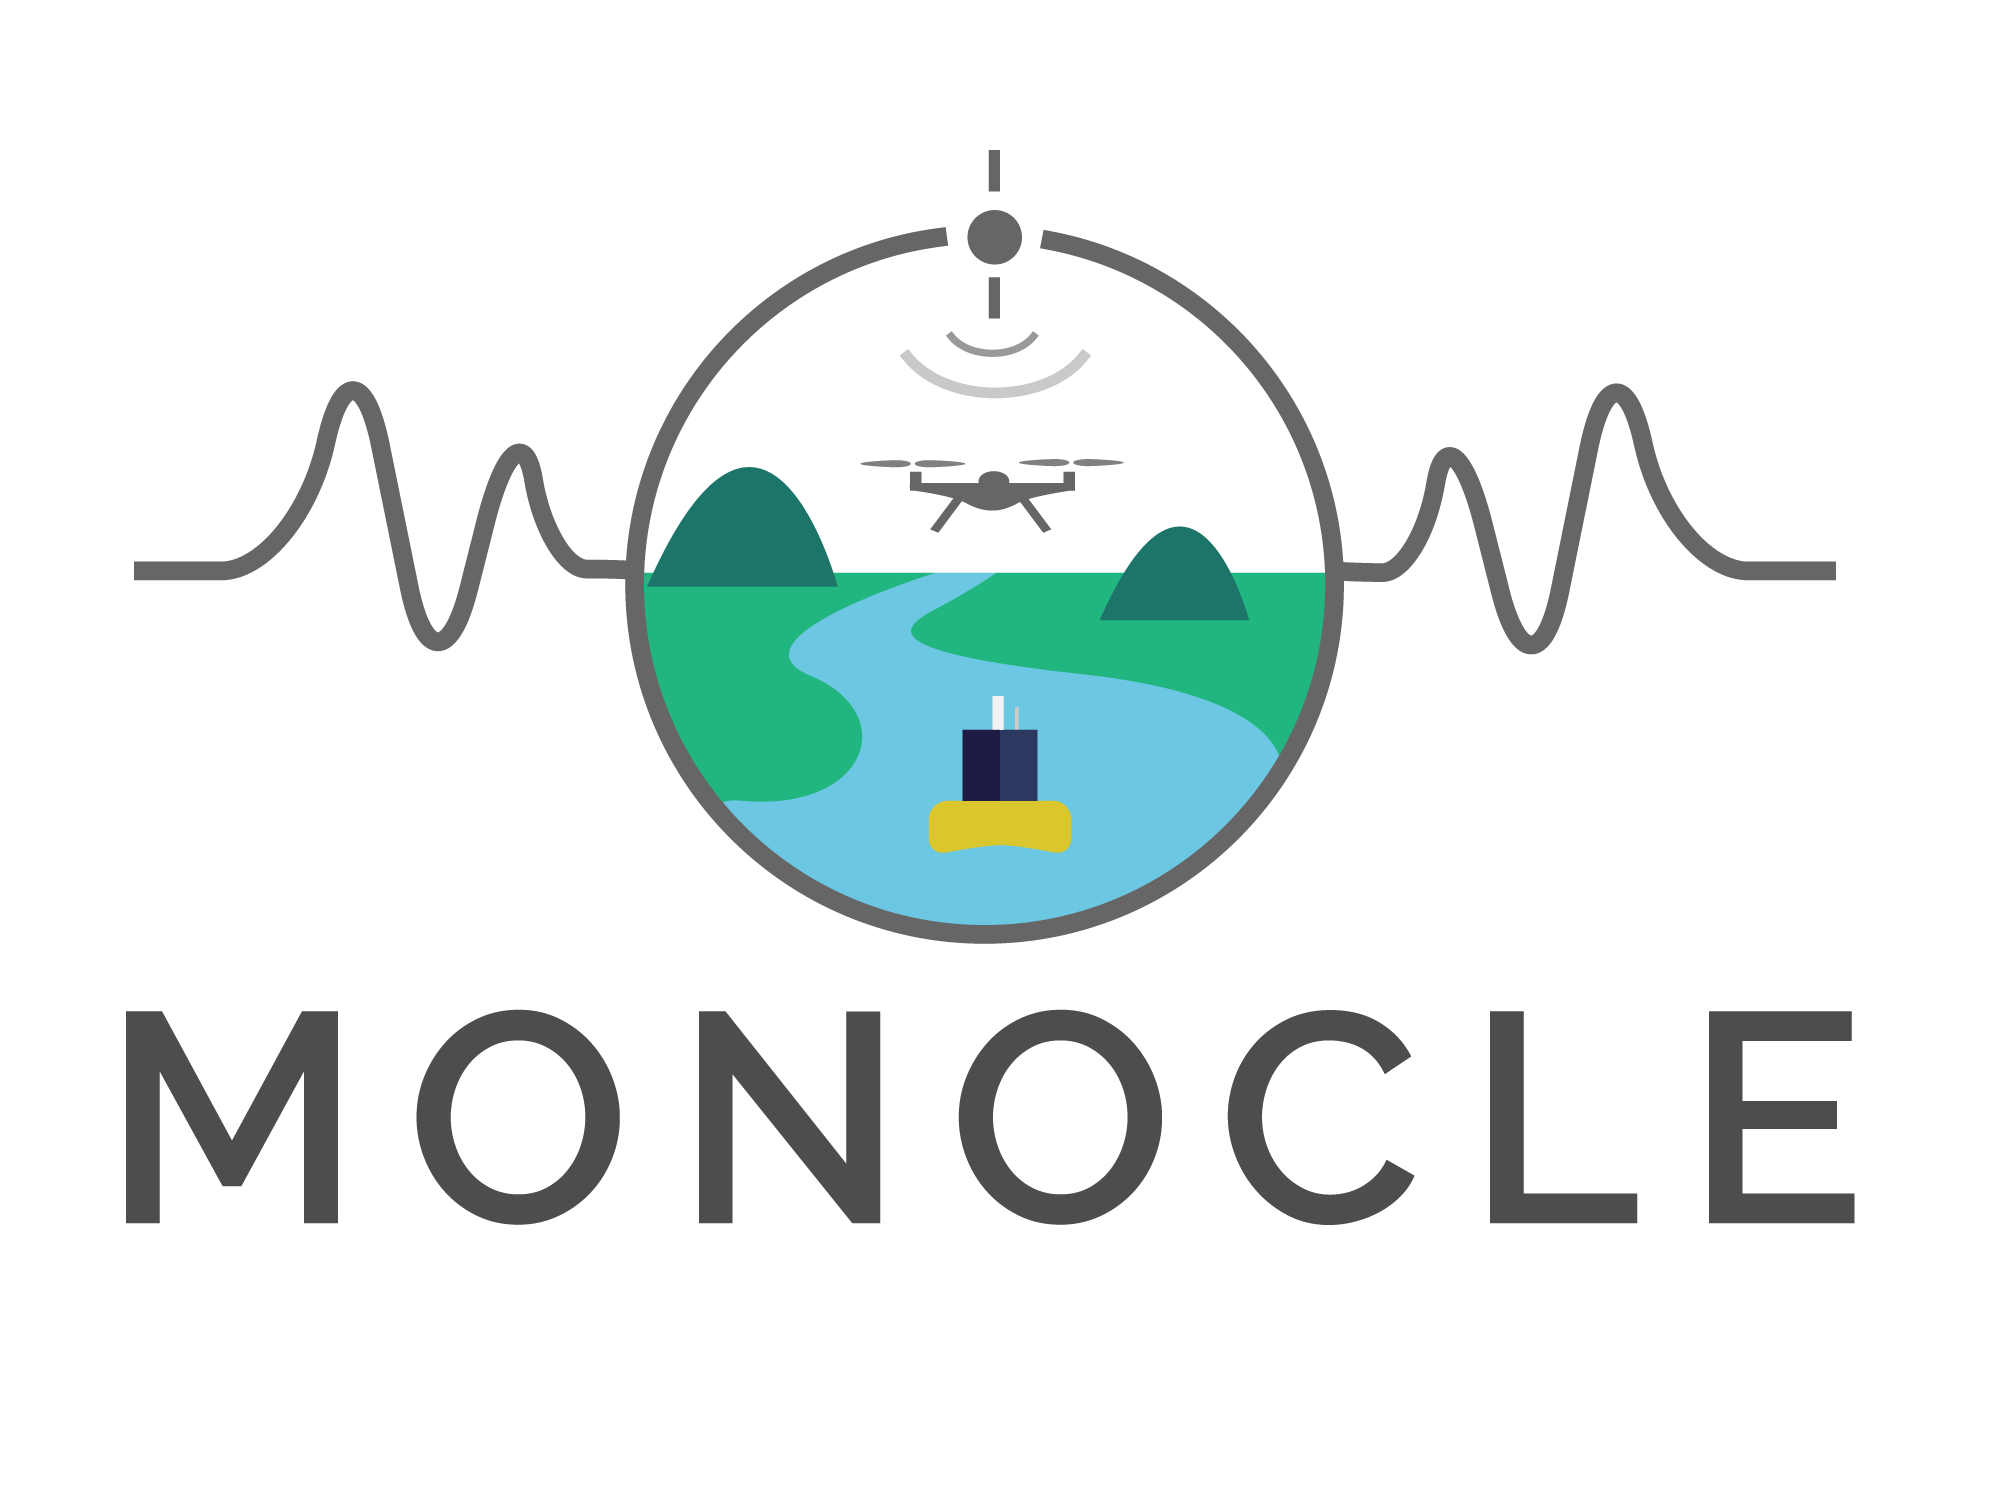 monocle clipart real